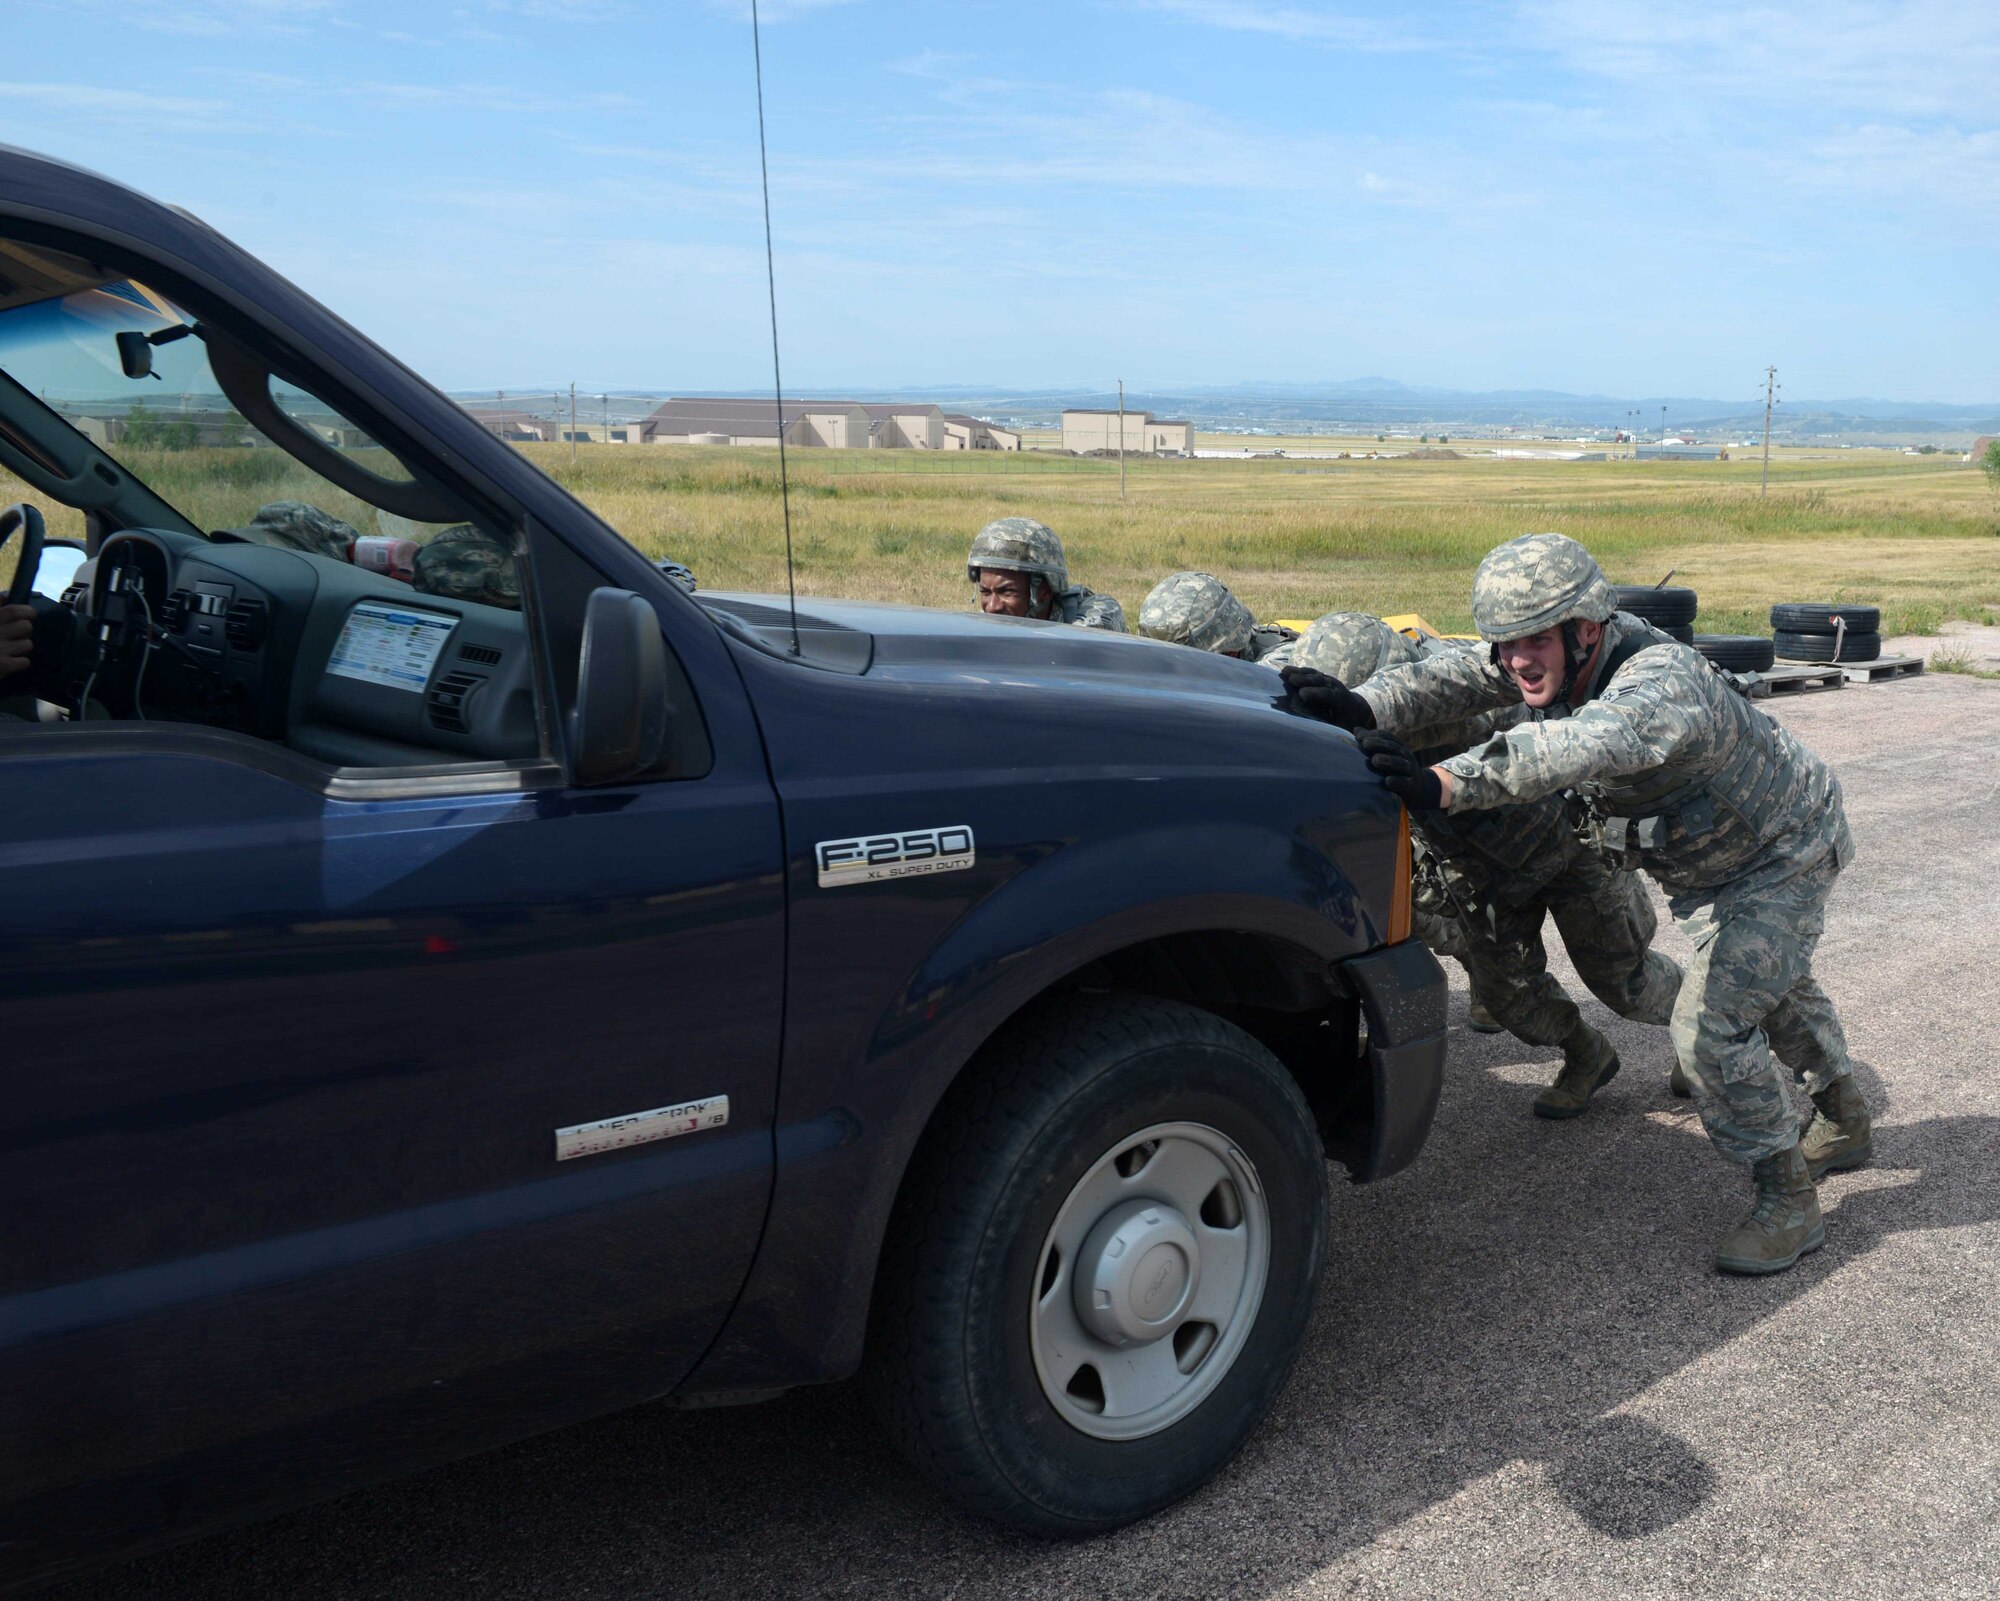 Airmen with the 28th Civil Engineer Squadron push a six-passenger vehicle during the Prime Base Engineer Emergency Force (BEEF) challenge at Ellsworth Air Force Base, S.D., July 22, 2016. The Six-PAX Push is an endurance event where four Airmen push a six-passenger vehicle for 100 yards. (U.S. Air Force photo by Airman Donald Knechtel)